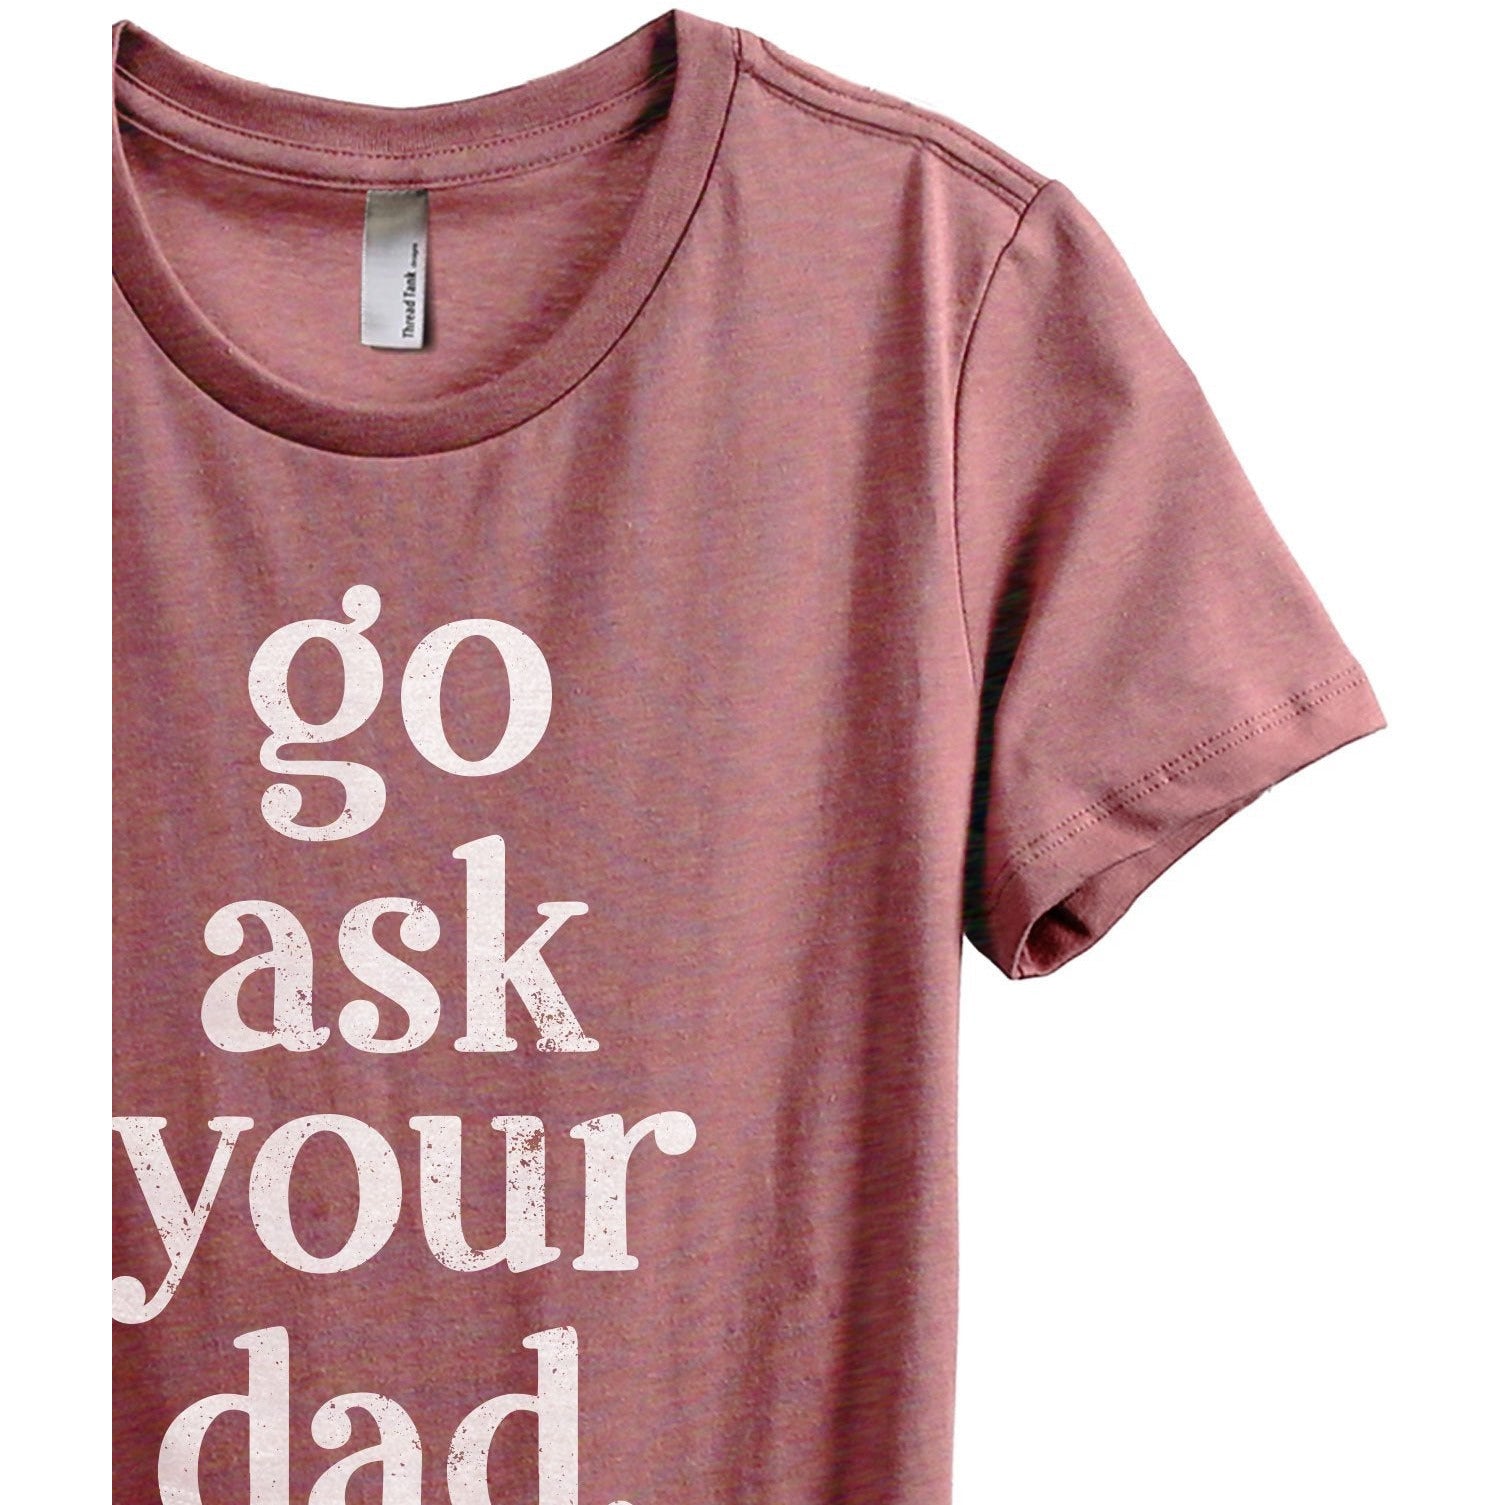 Go Ask Your Dad Women's Relaxed Crewneck T-Shirt Top Tee Heather Rouge Zoom Details
